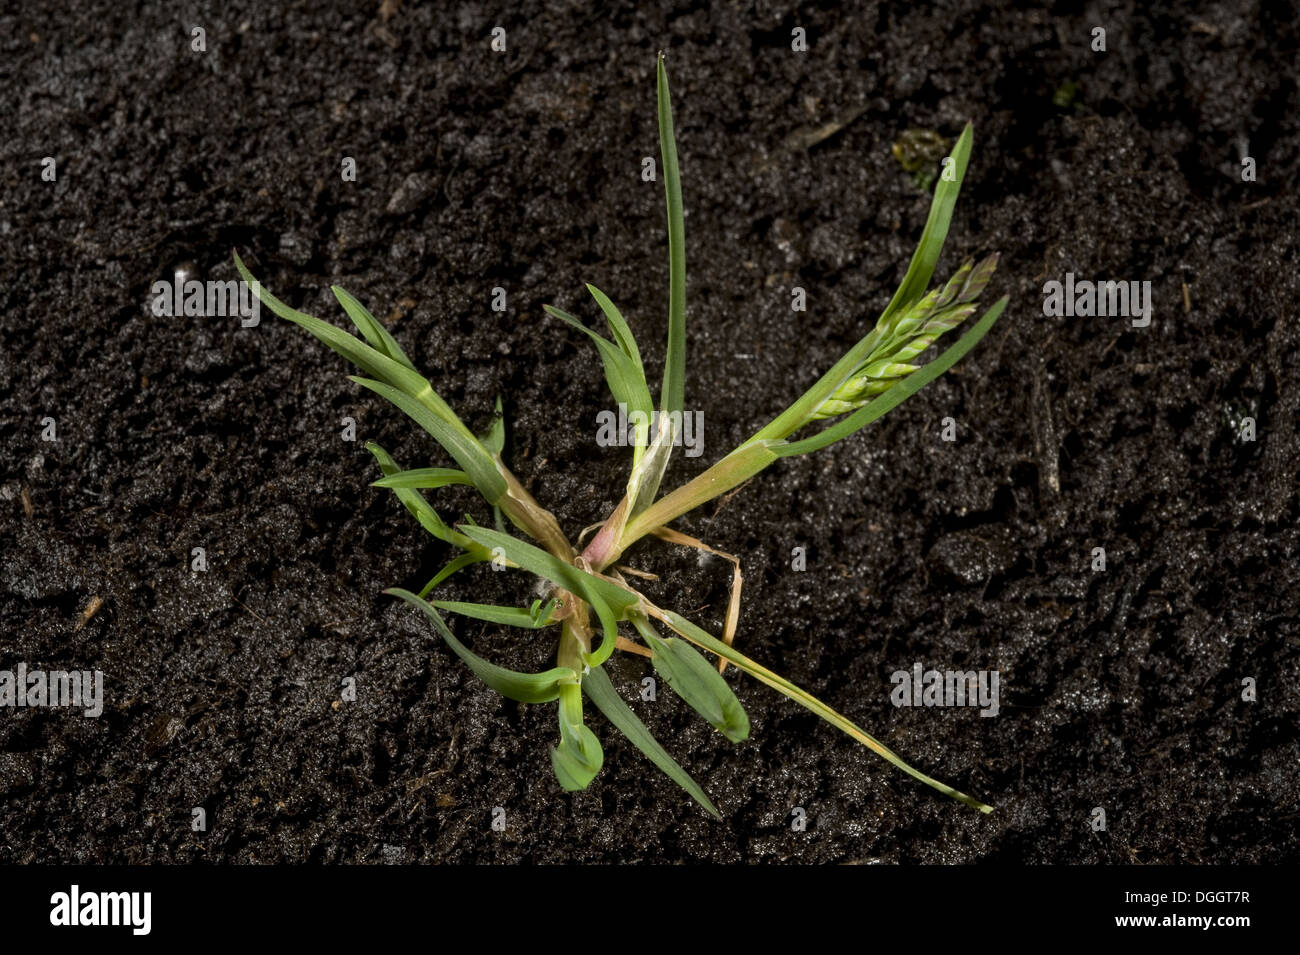 Annual meadow-grass, Poa annua, with tillers and flower bud, a prostrate annual garden and agriculture weed Stock Photo